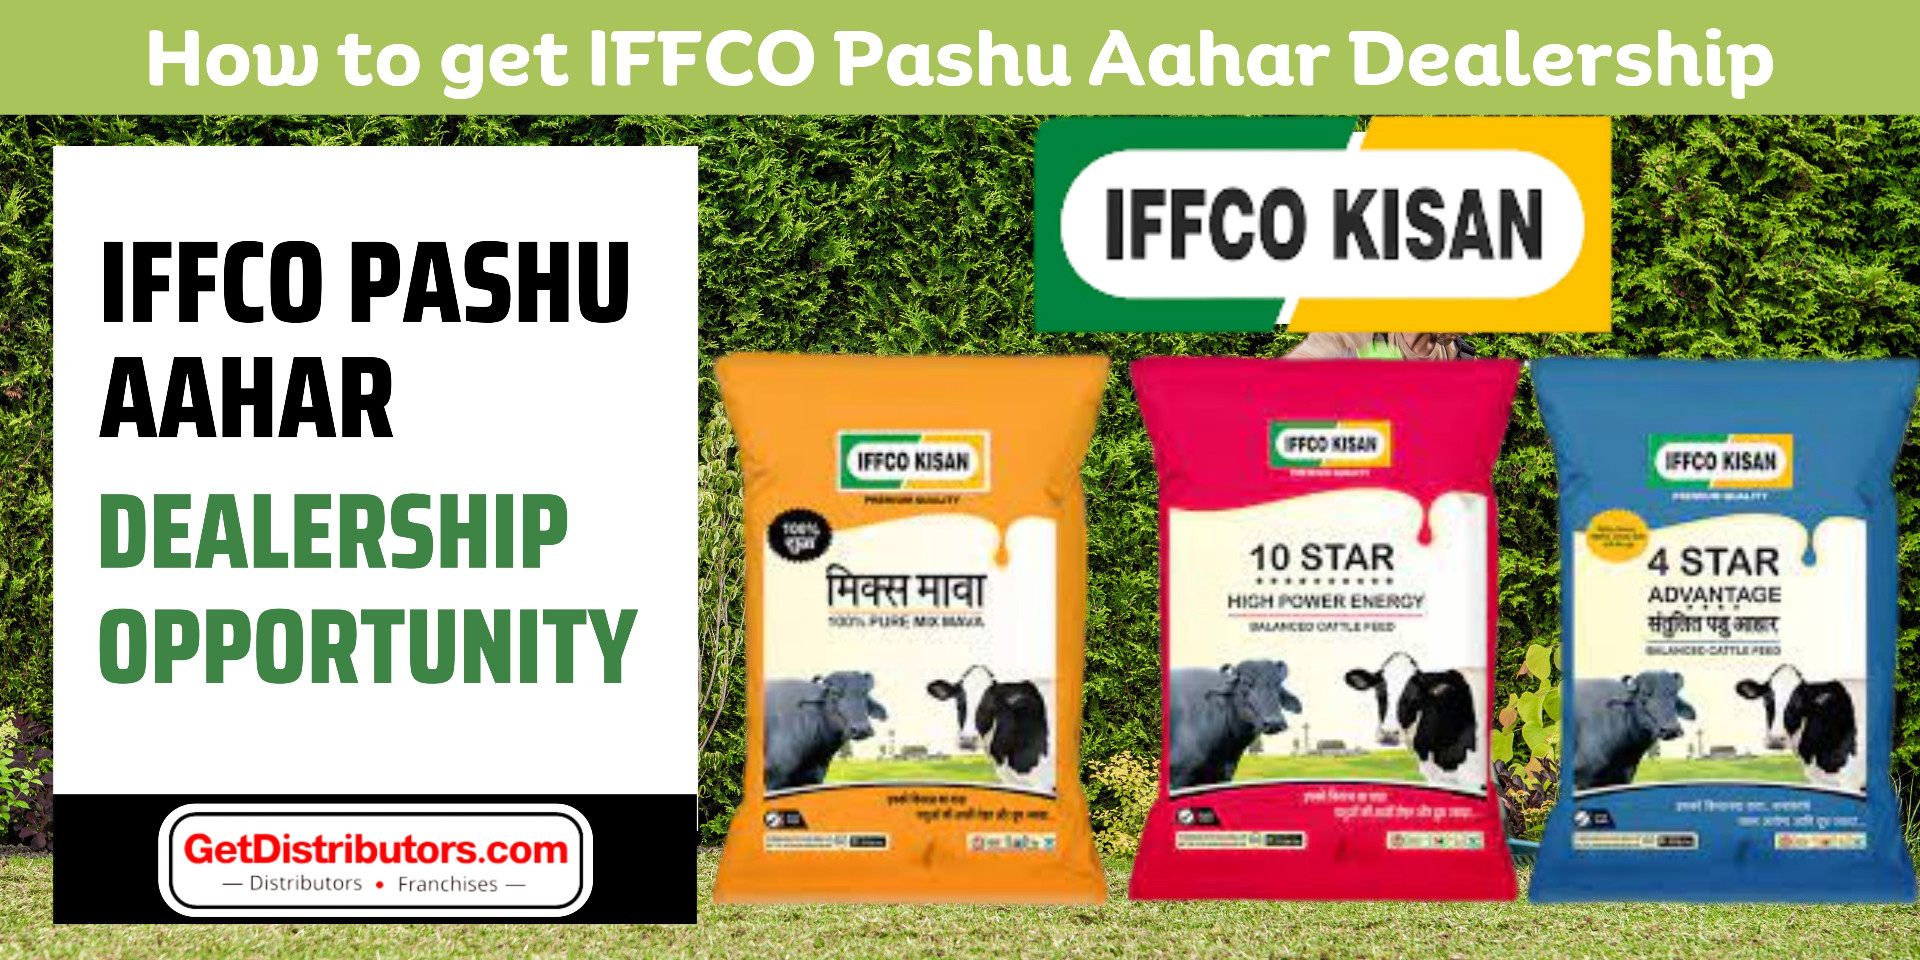 IFFCO Pashu Aahar Dealership Opportunity